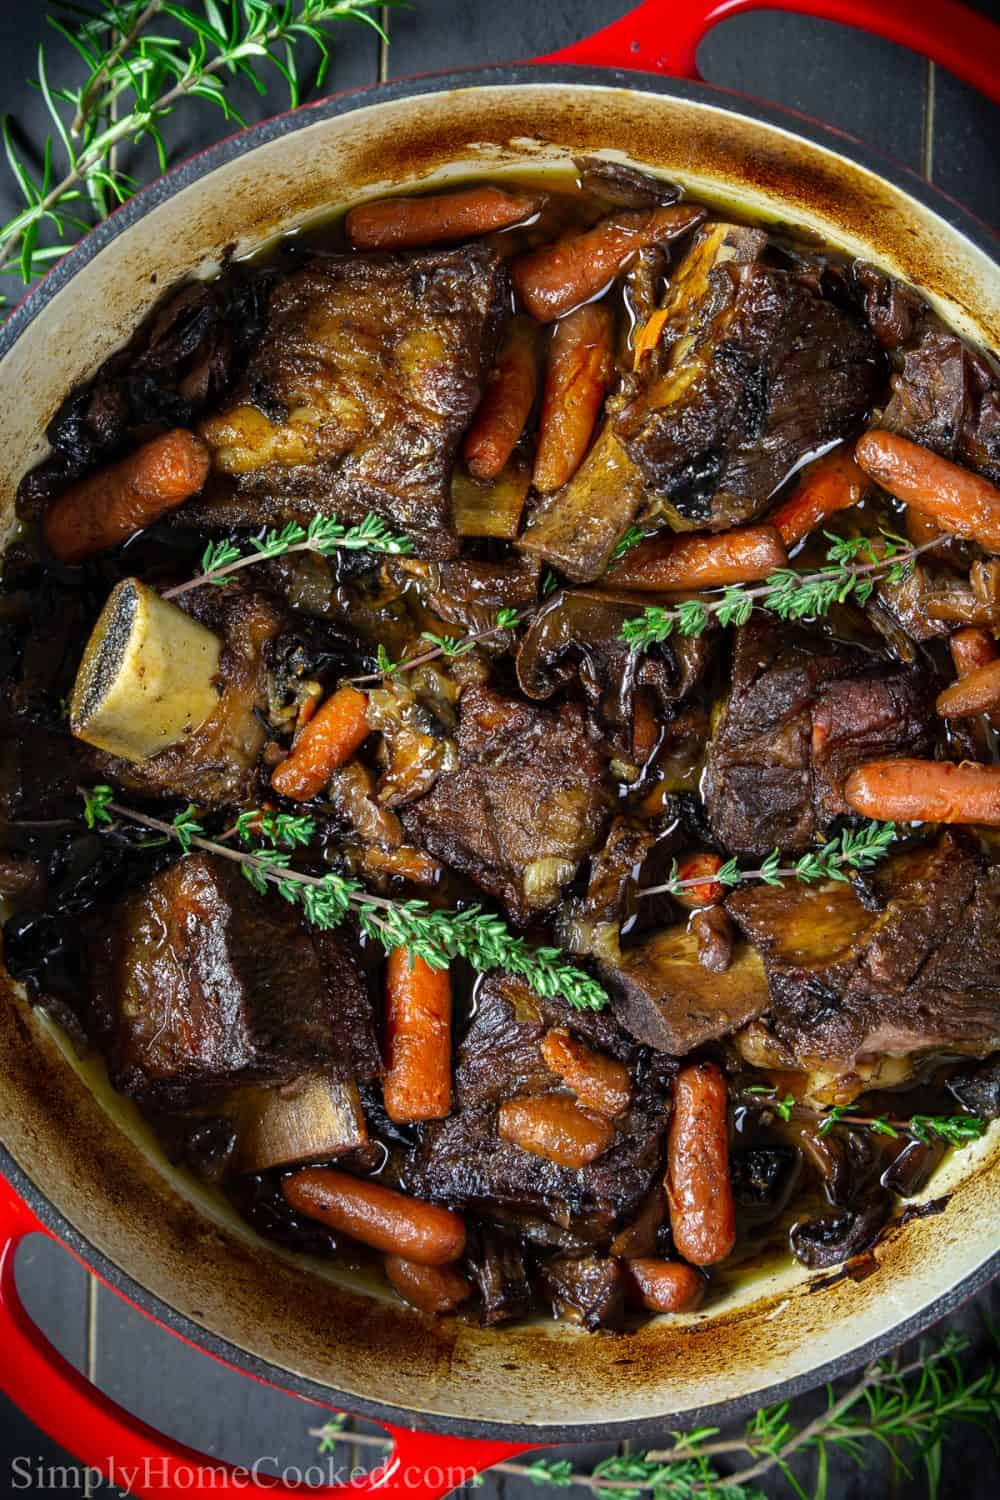 Braised Beef Short Ribs (VIDEO) - Simply Home Cooked